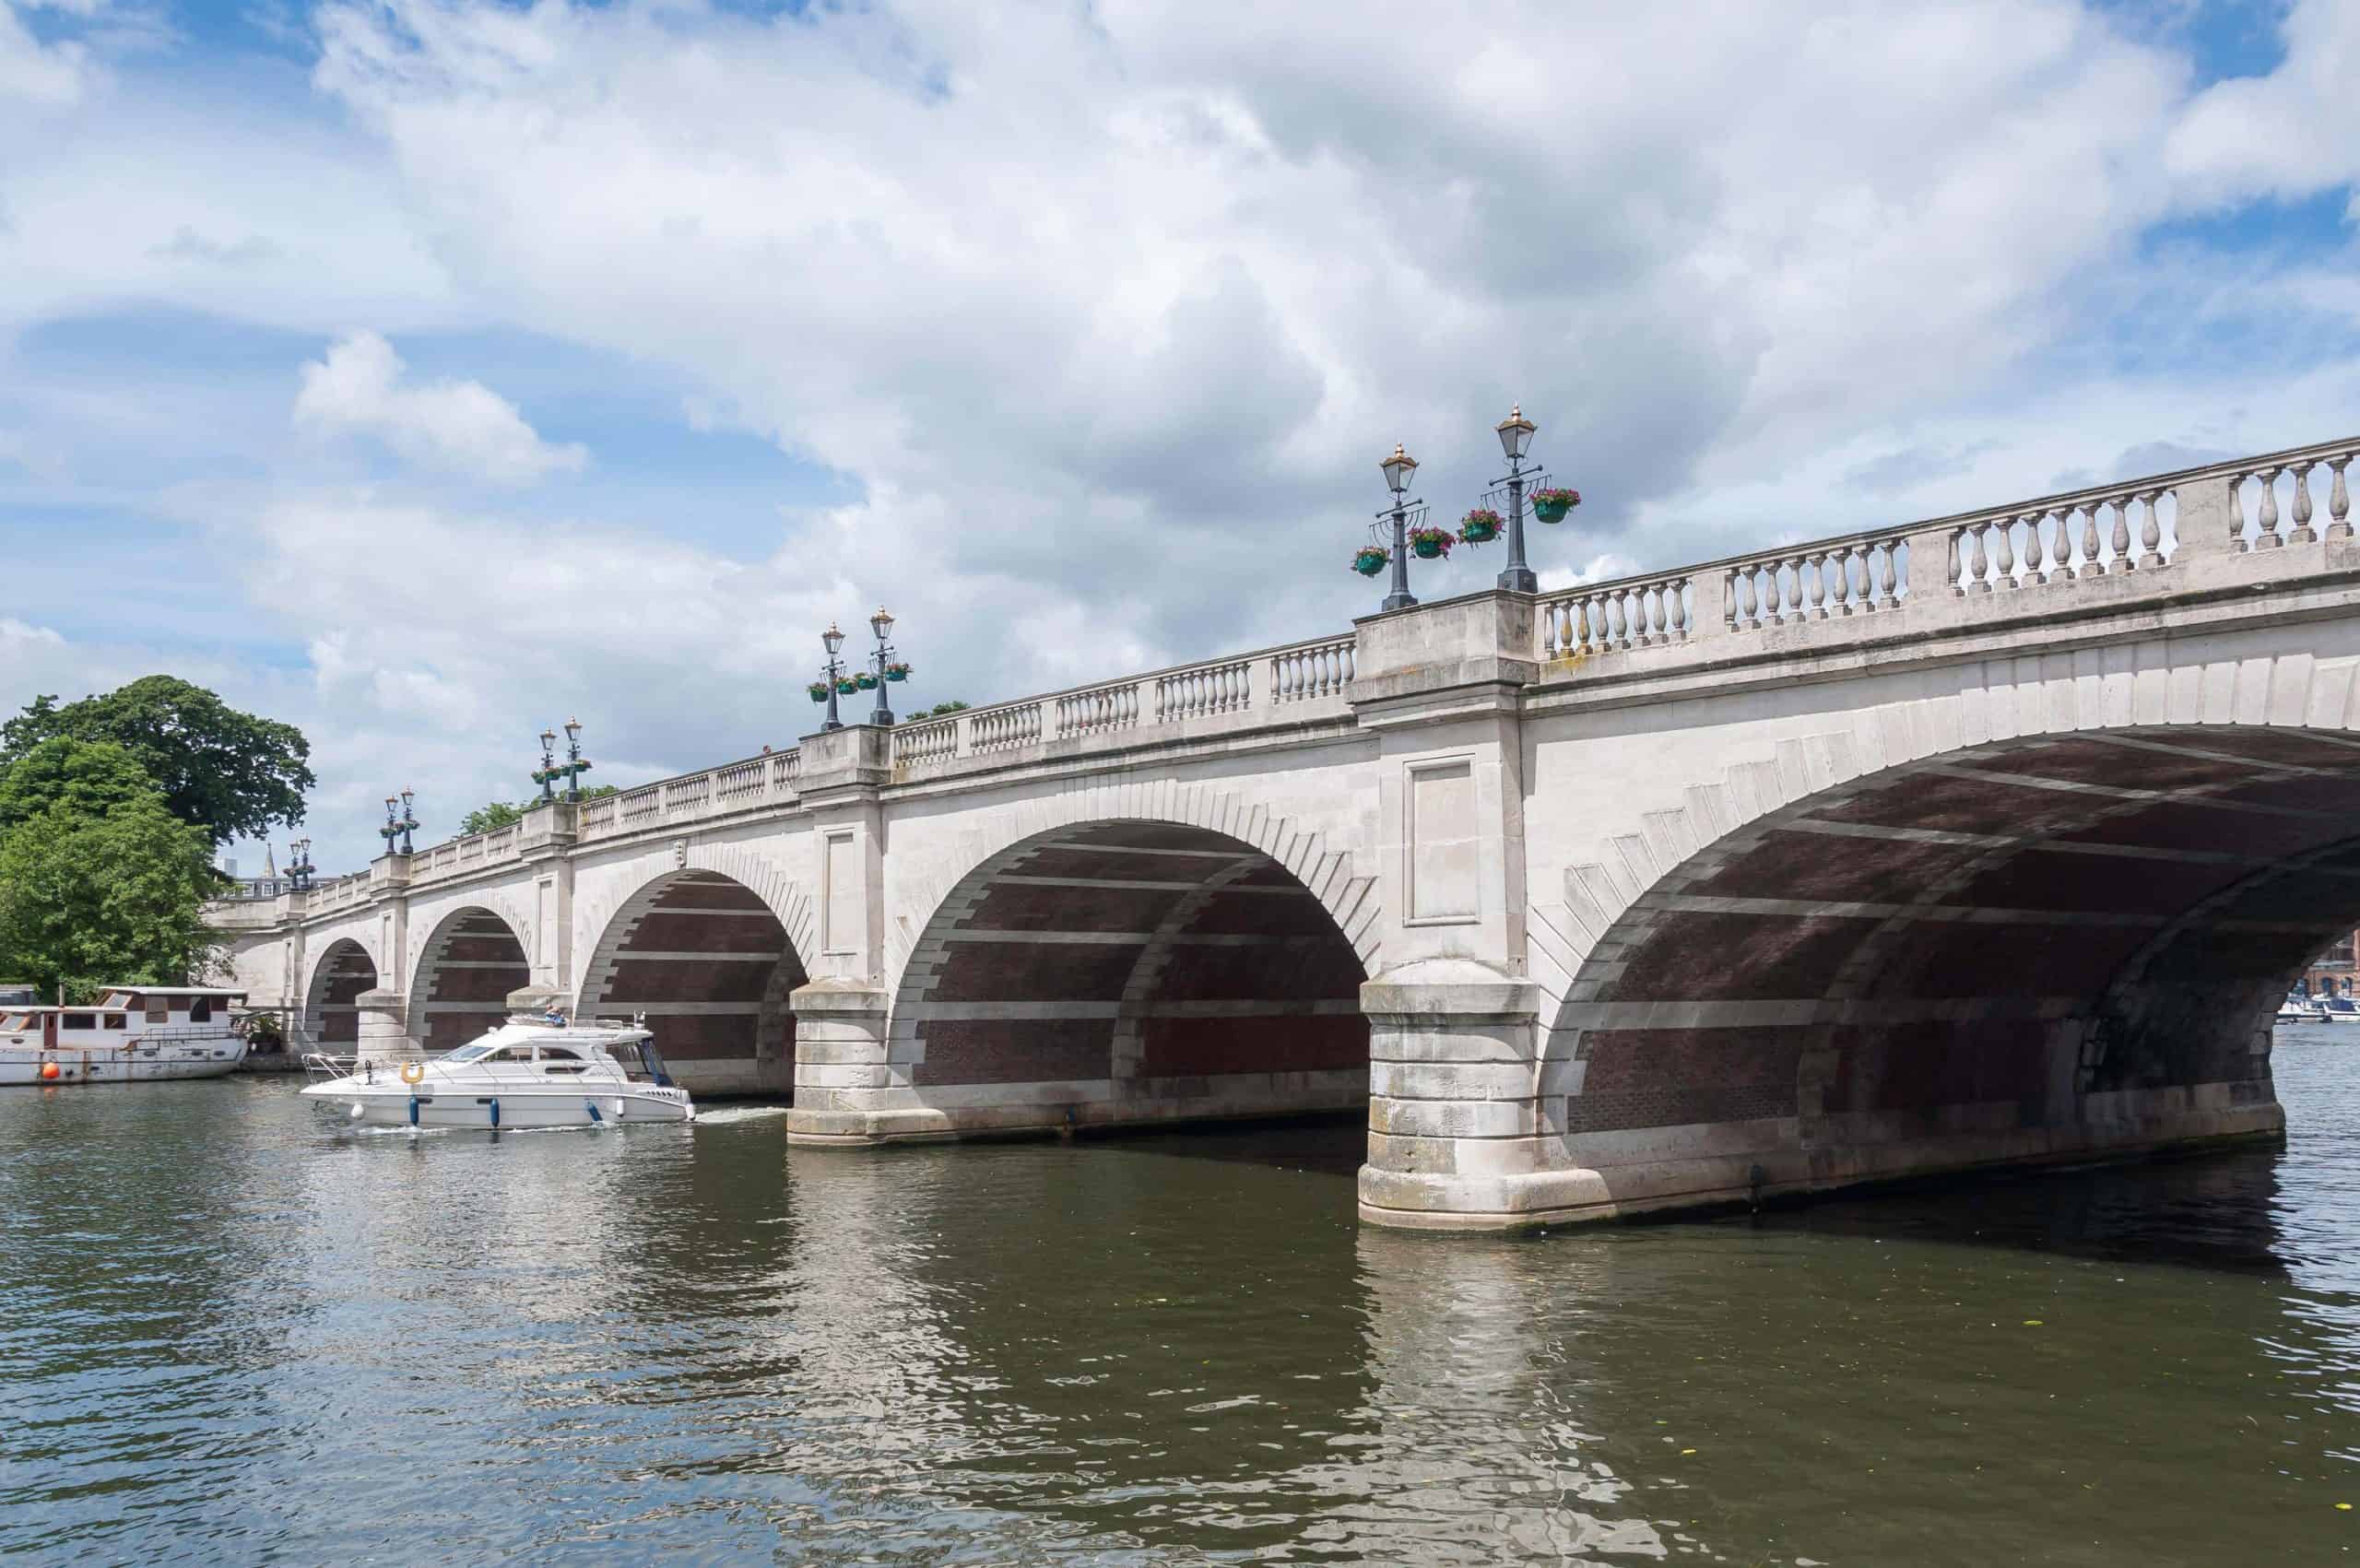 Man in 20s dies after falling into Thames while being arrested by police – second incident this summer